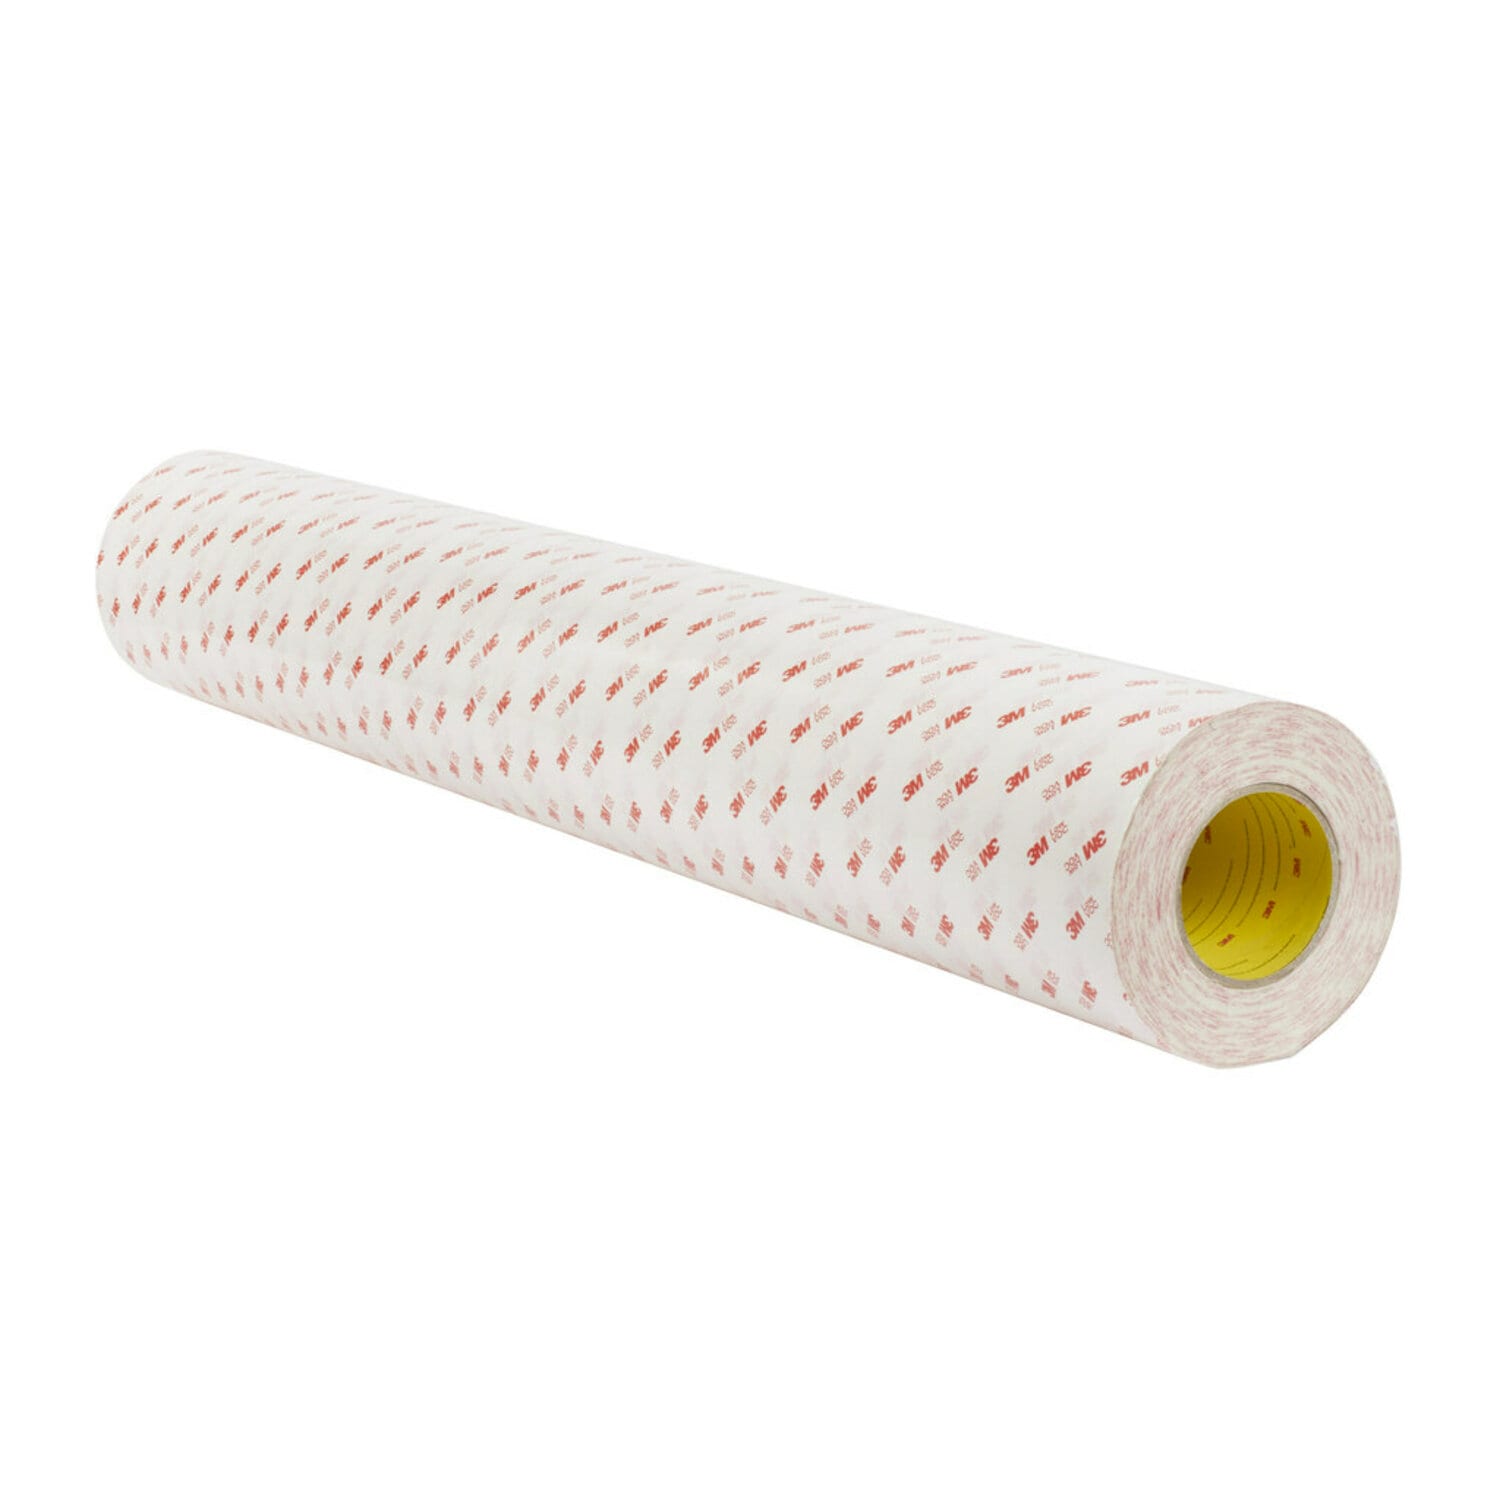 7100085845 - 3M Low VOC Double Coated Tissue Tape 99015LVC, Clear, 1500 mm x 50 m,
0.15 mm, 1 Roll/ Case